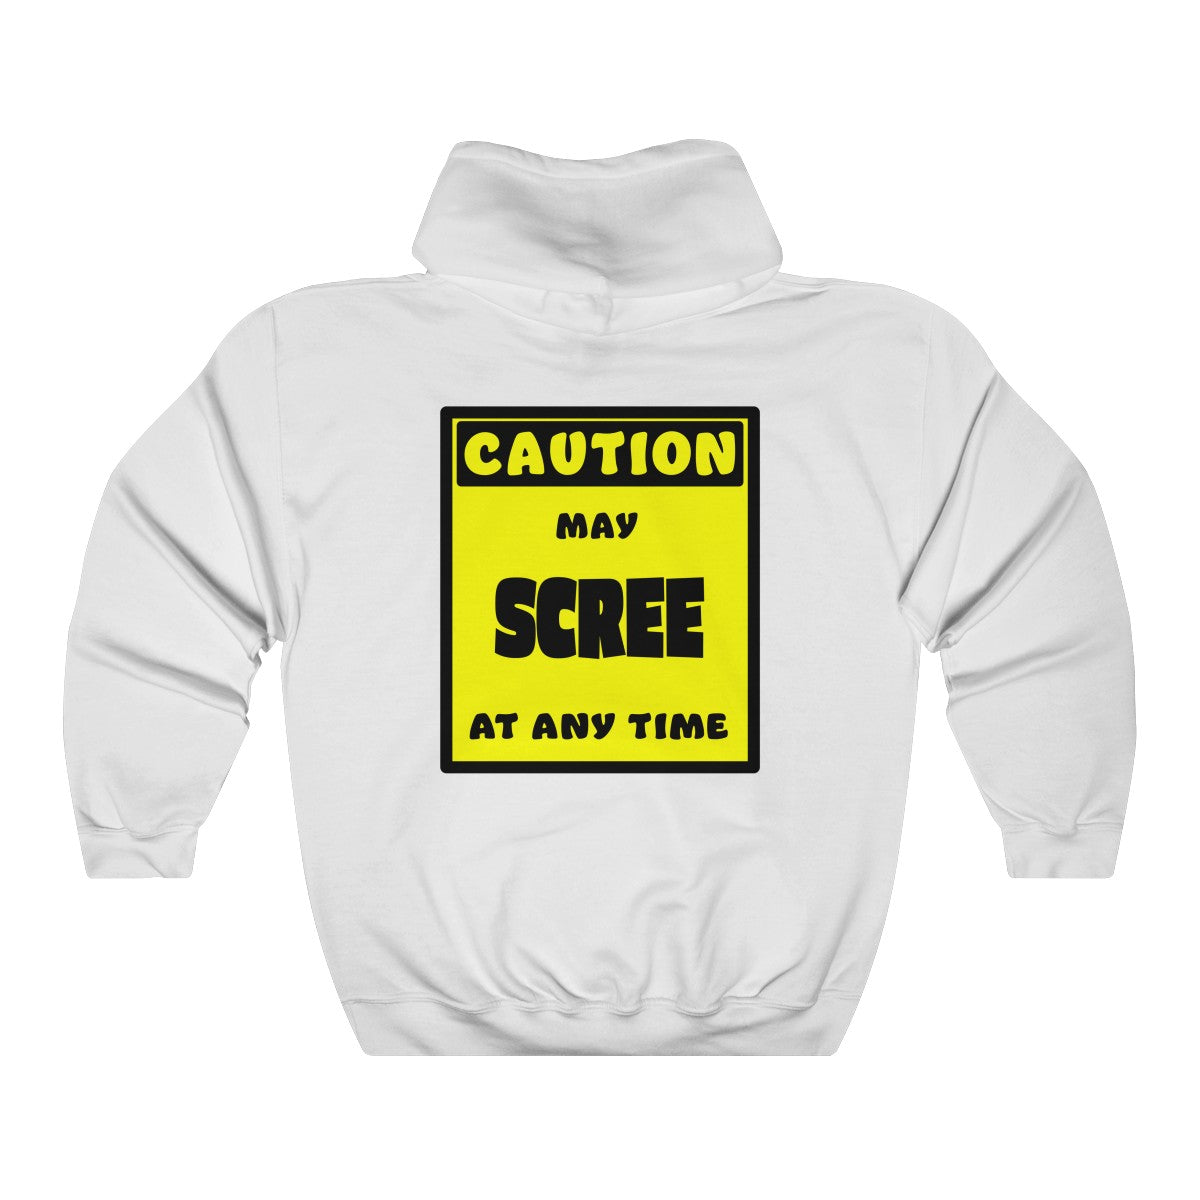 CAUTION! May SCREE at any time! - Hoodie Hoodie AFLT-Whootorca White S 